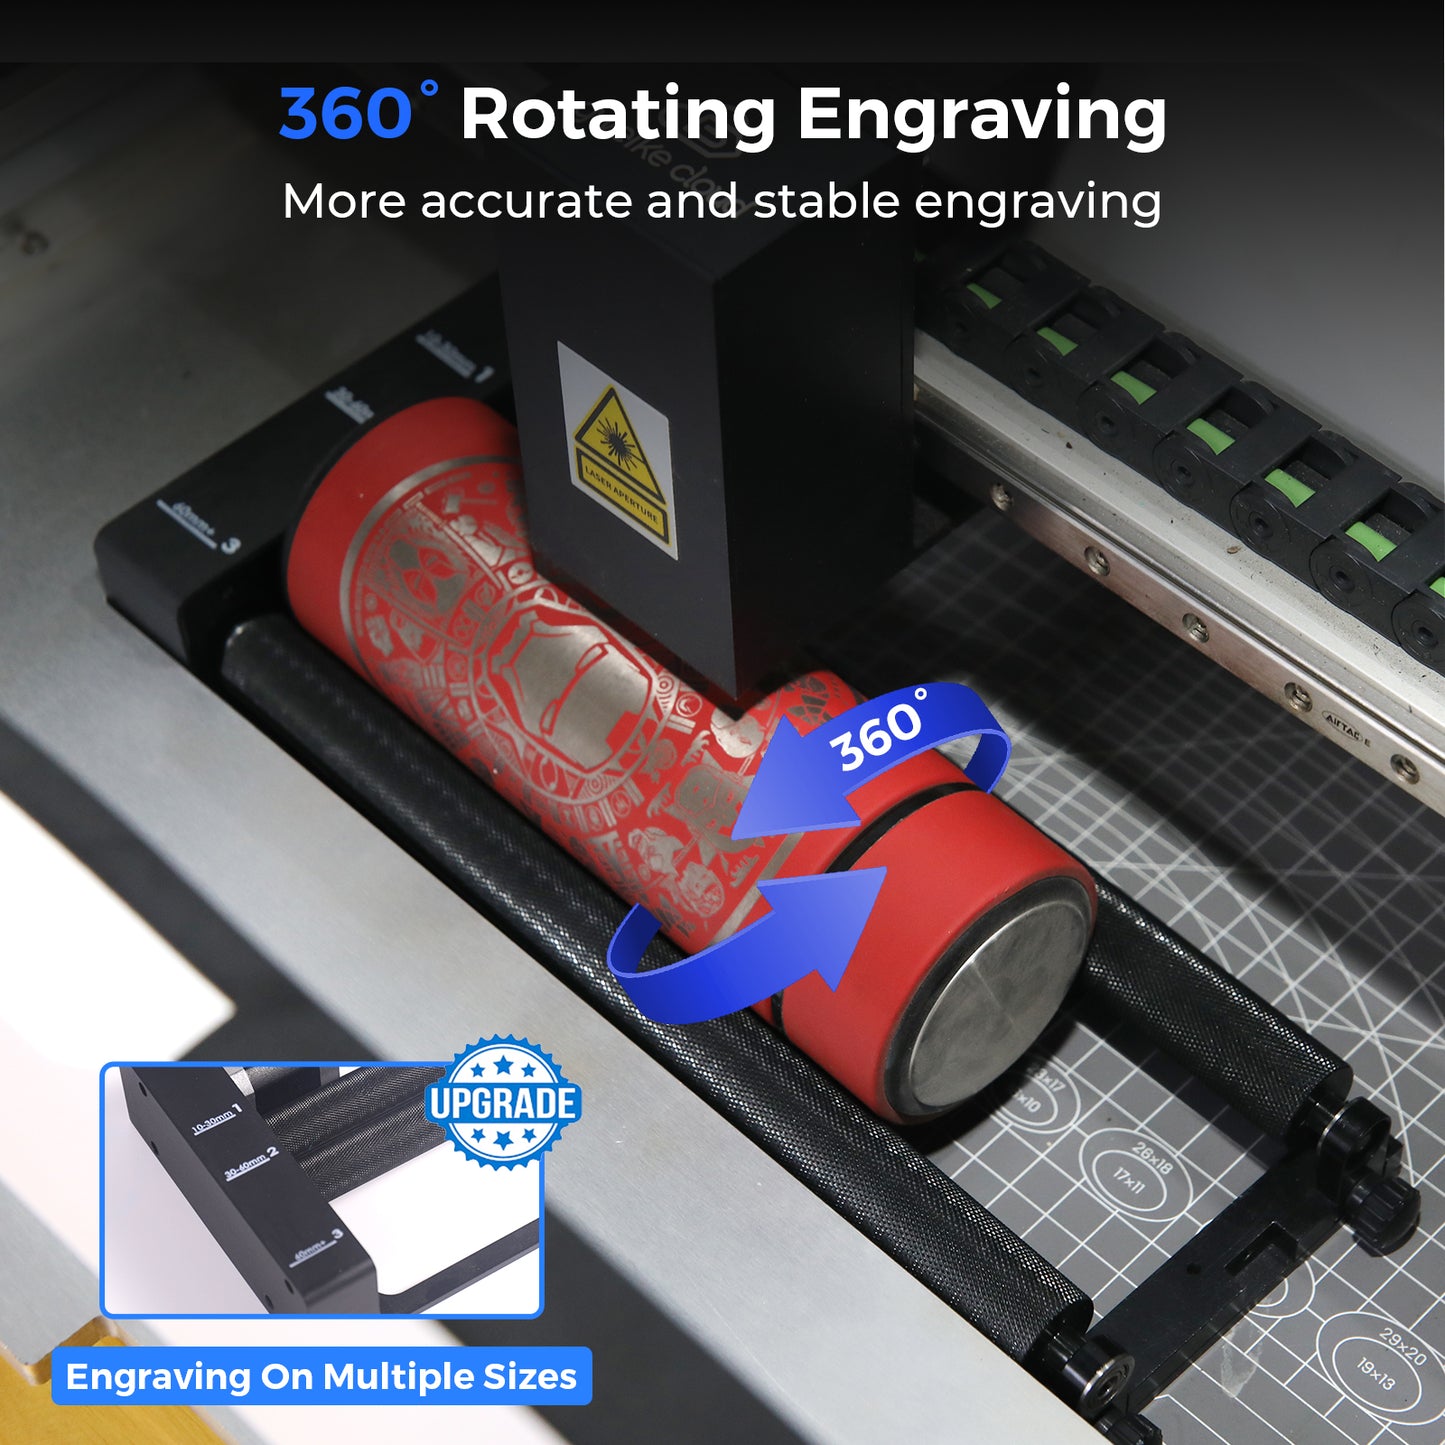 Gweike Cloud Laser Cutter & Engraver with Rotary CO2 (50W) Pro II – 主站